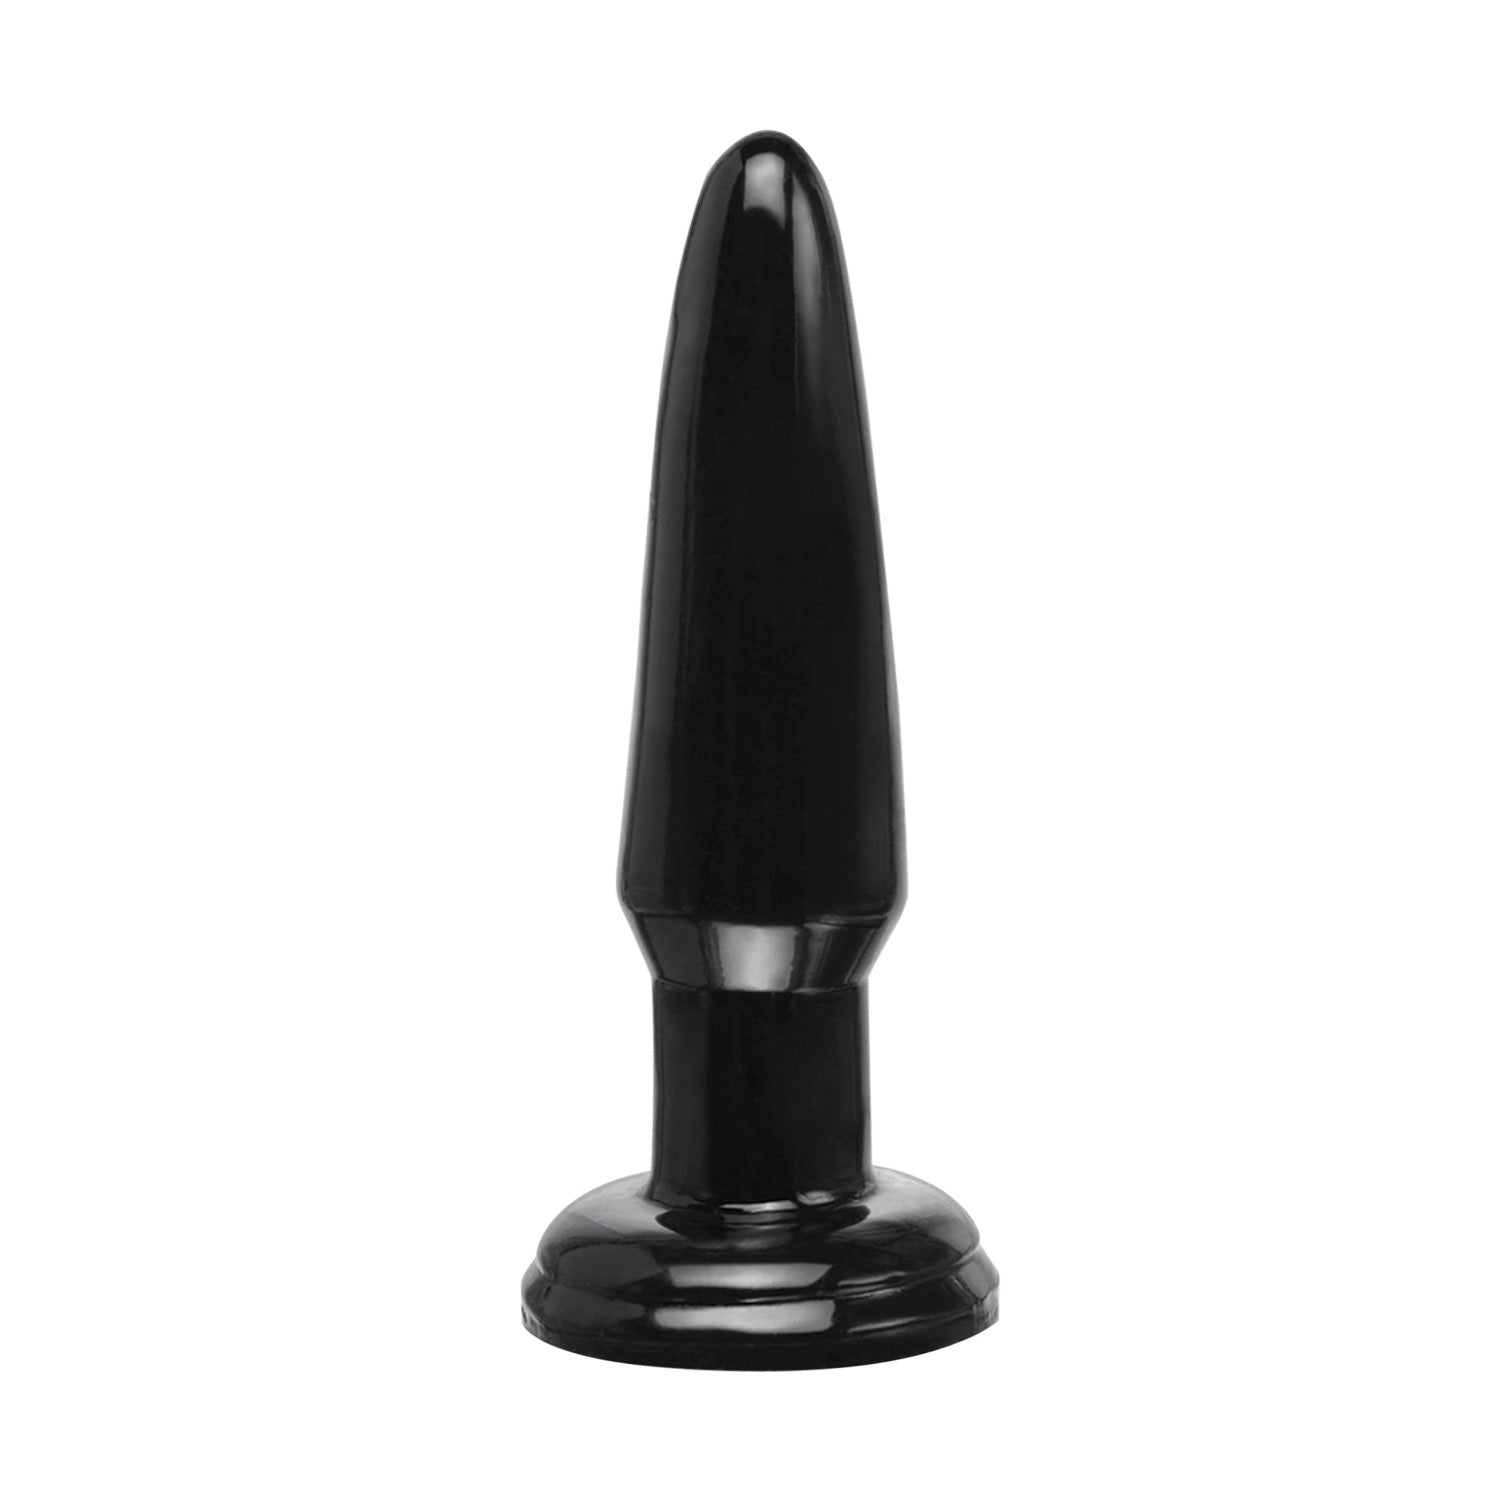 Fetish Fantasy Series Limited Edition Beginner&#39;s Butt Plug - Black 9.5 cm (3.75&quot;) Butt Plug by Pipedream